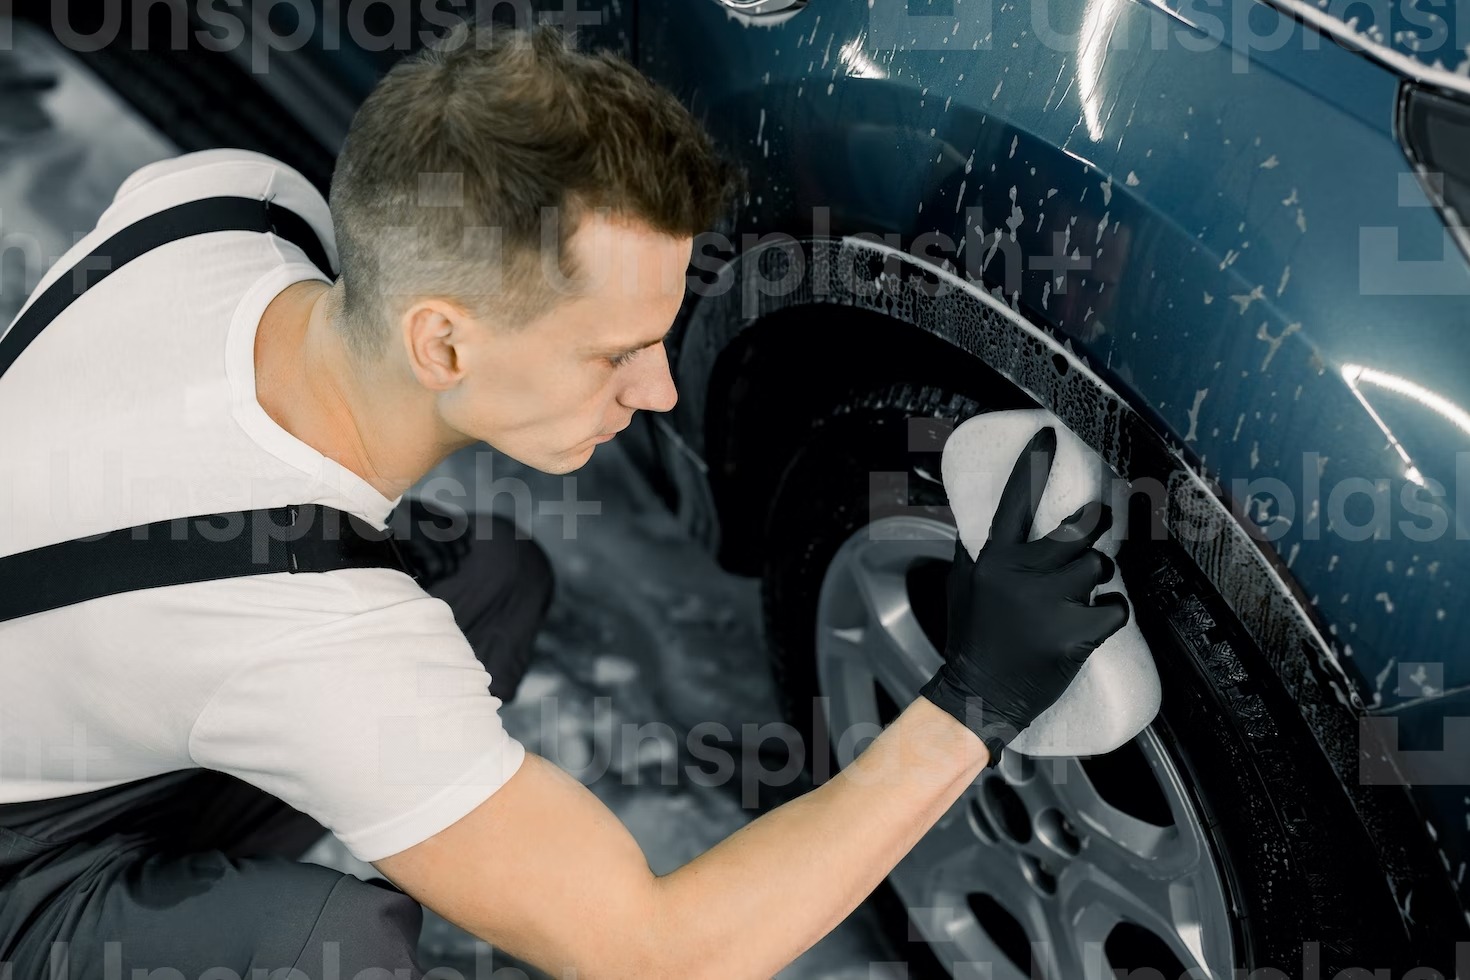 A person cleaning a car’s tire